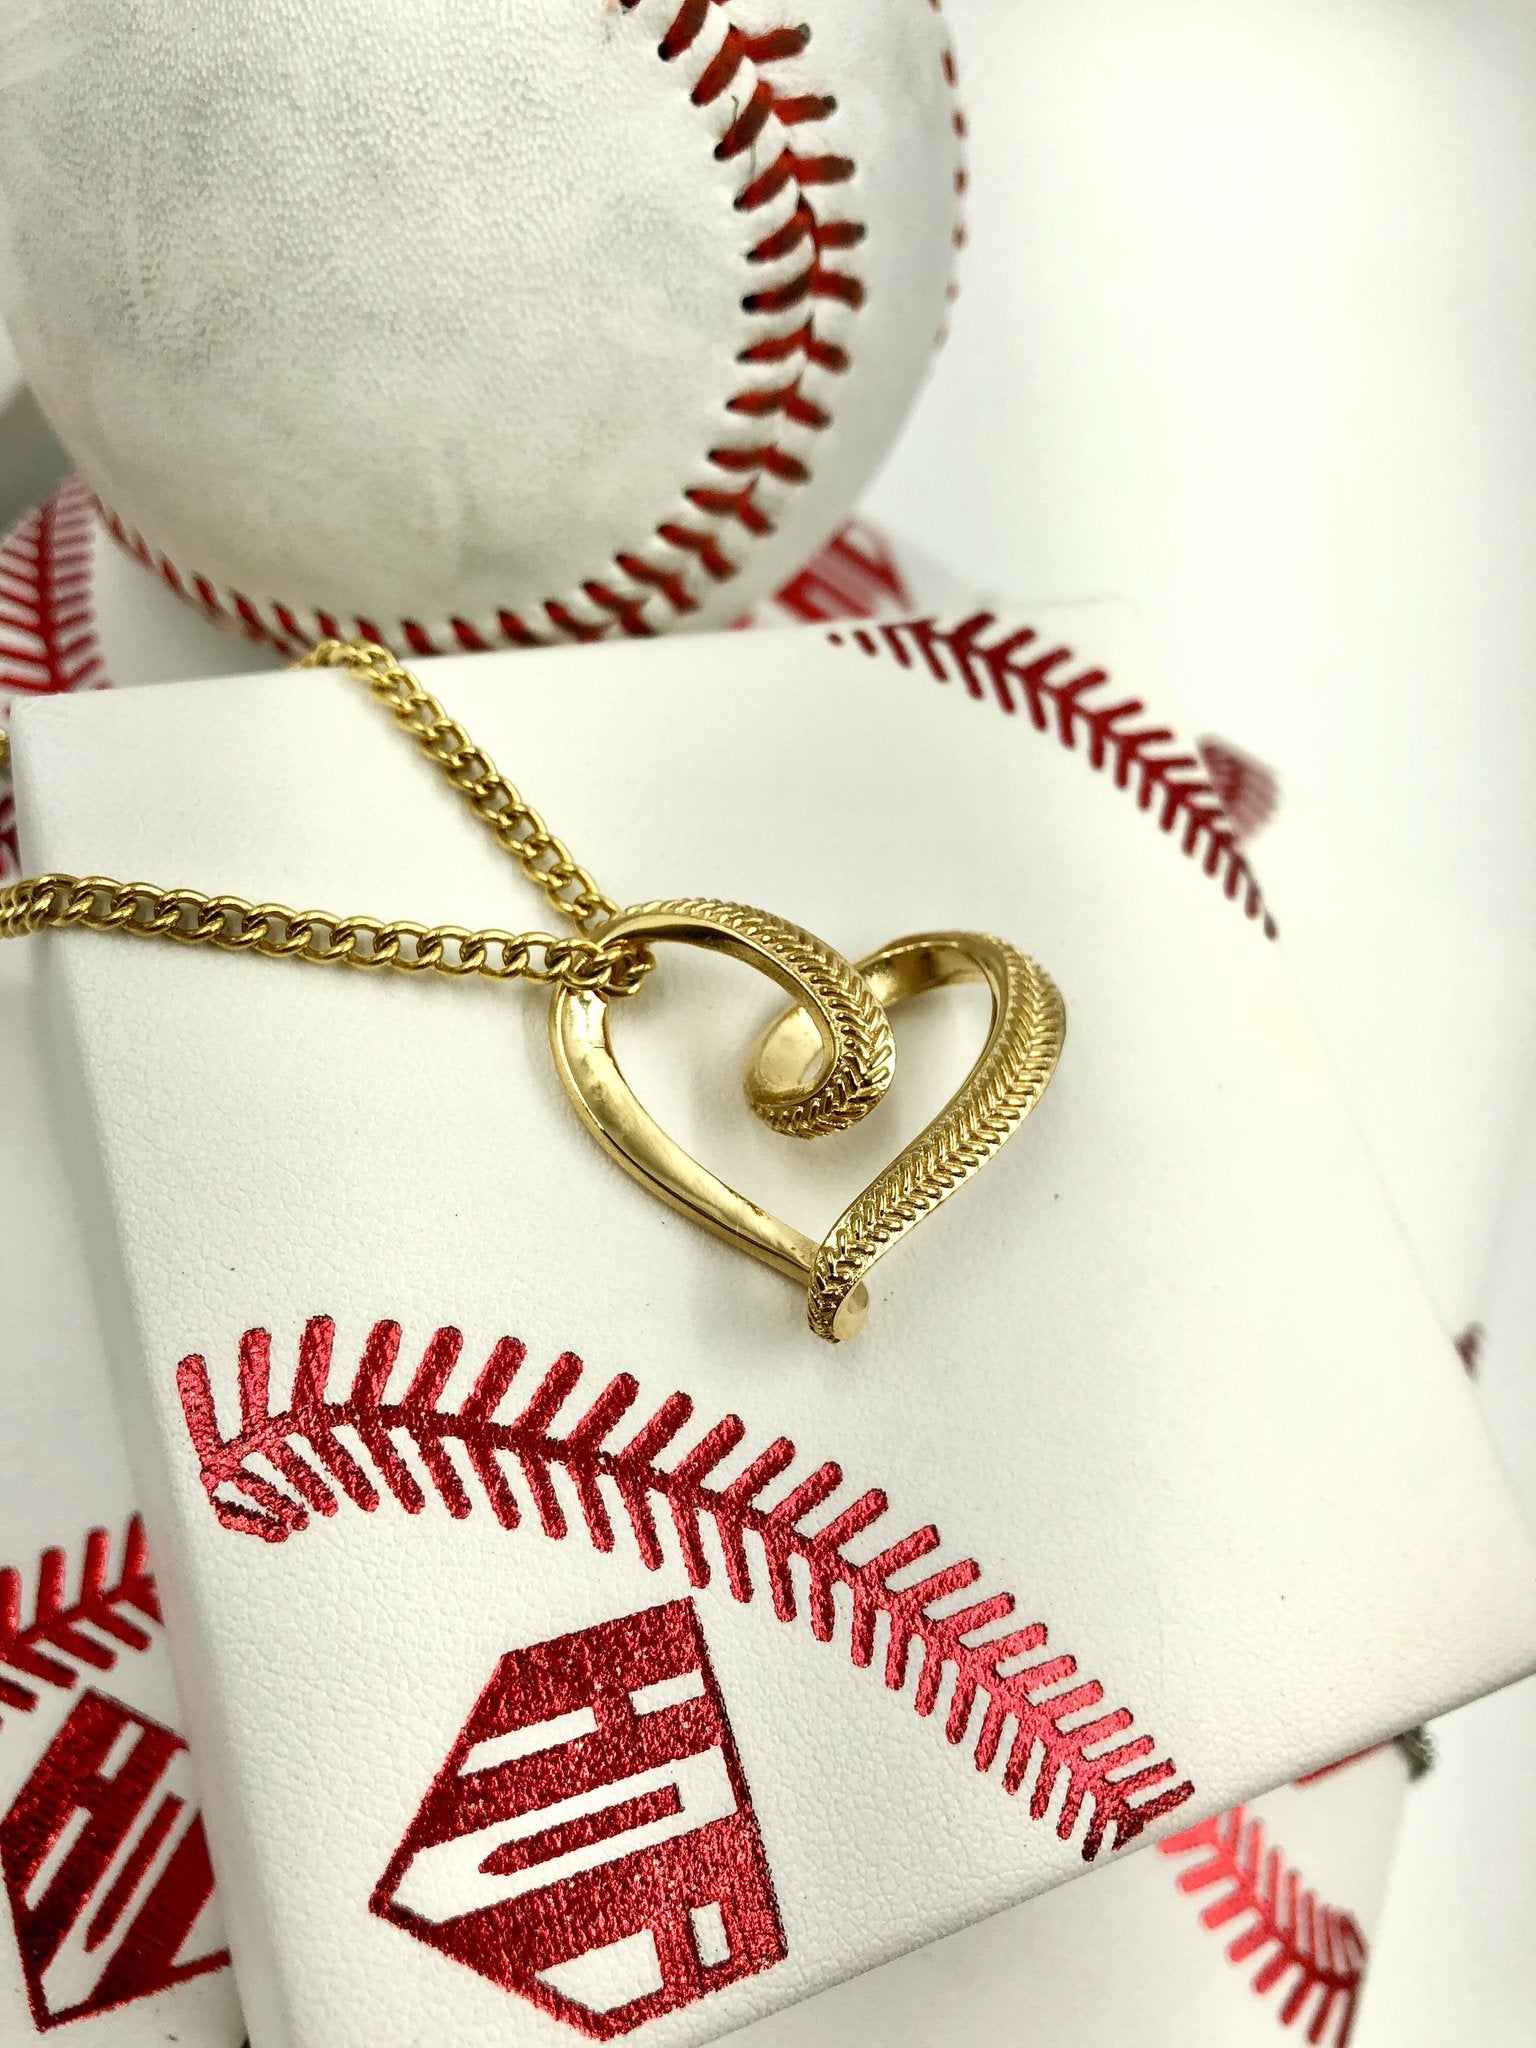 Golden Baseball Stitched Infinity Heart Pendant and Chain - Baseball Legend Apparel